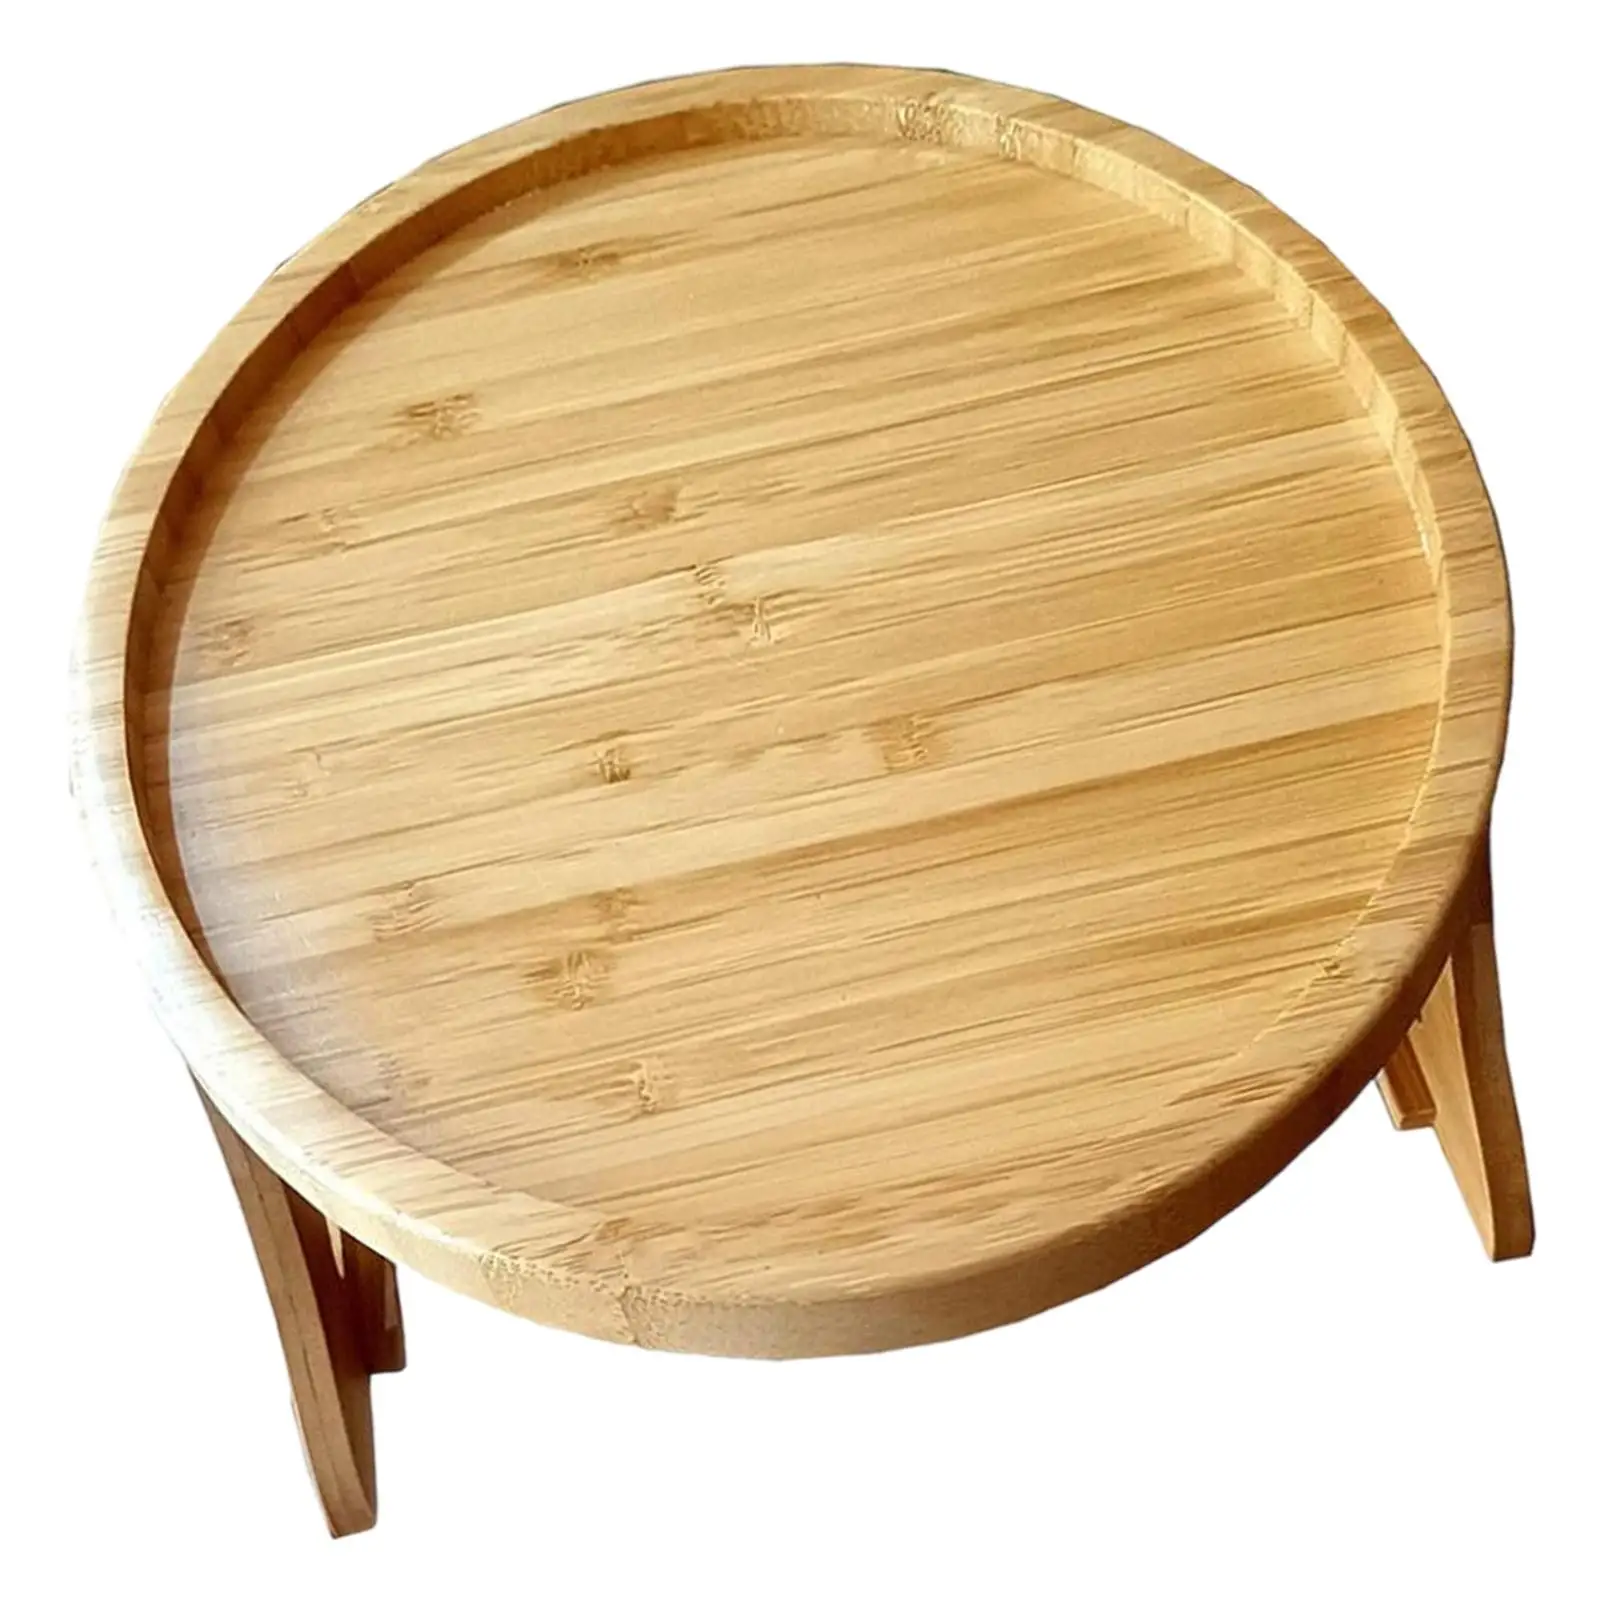 Rround Sofa Armrest Clip-on Tray, Unique Wooden Tableware Plates Side Tables, Platter for Remote Coffee Fruit Dessert